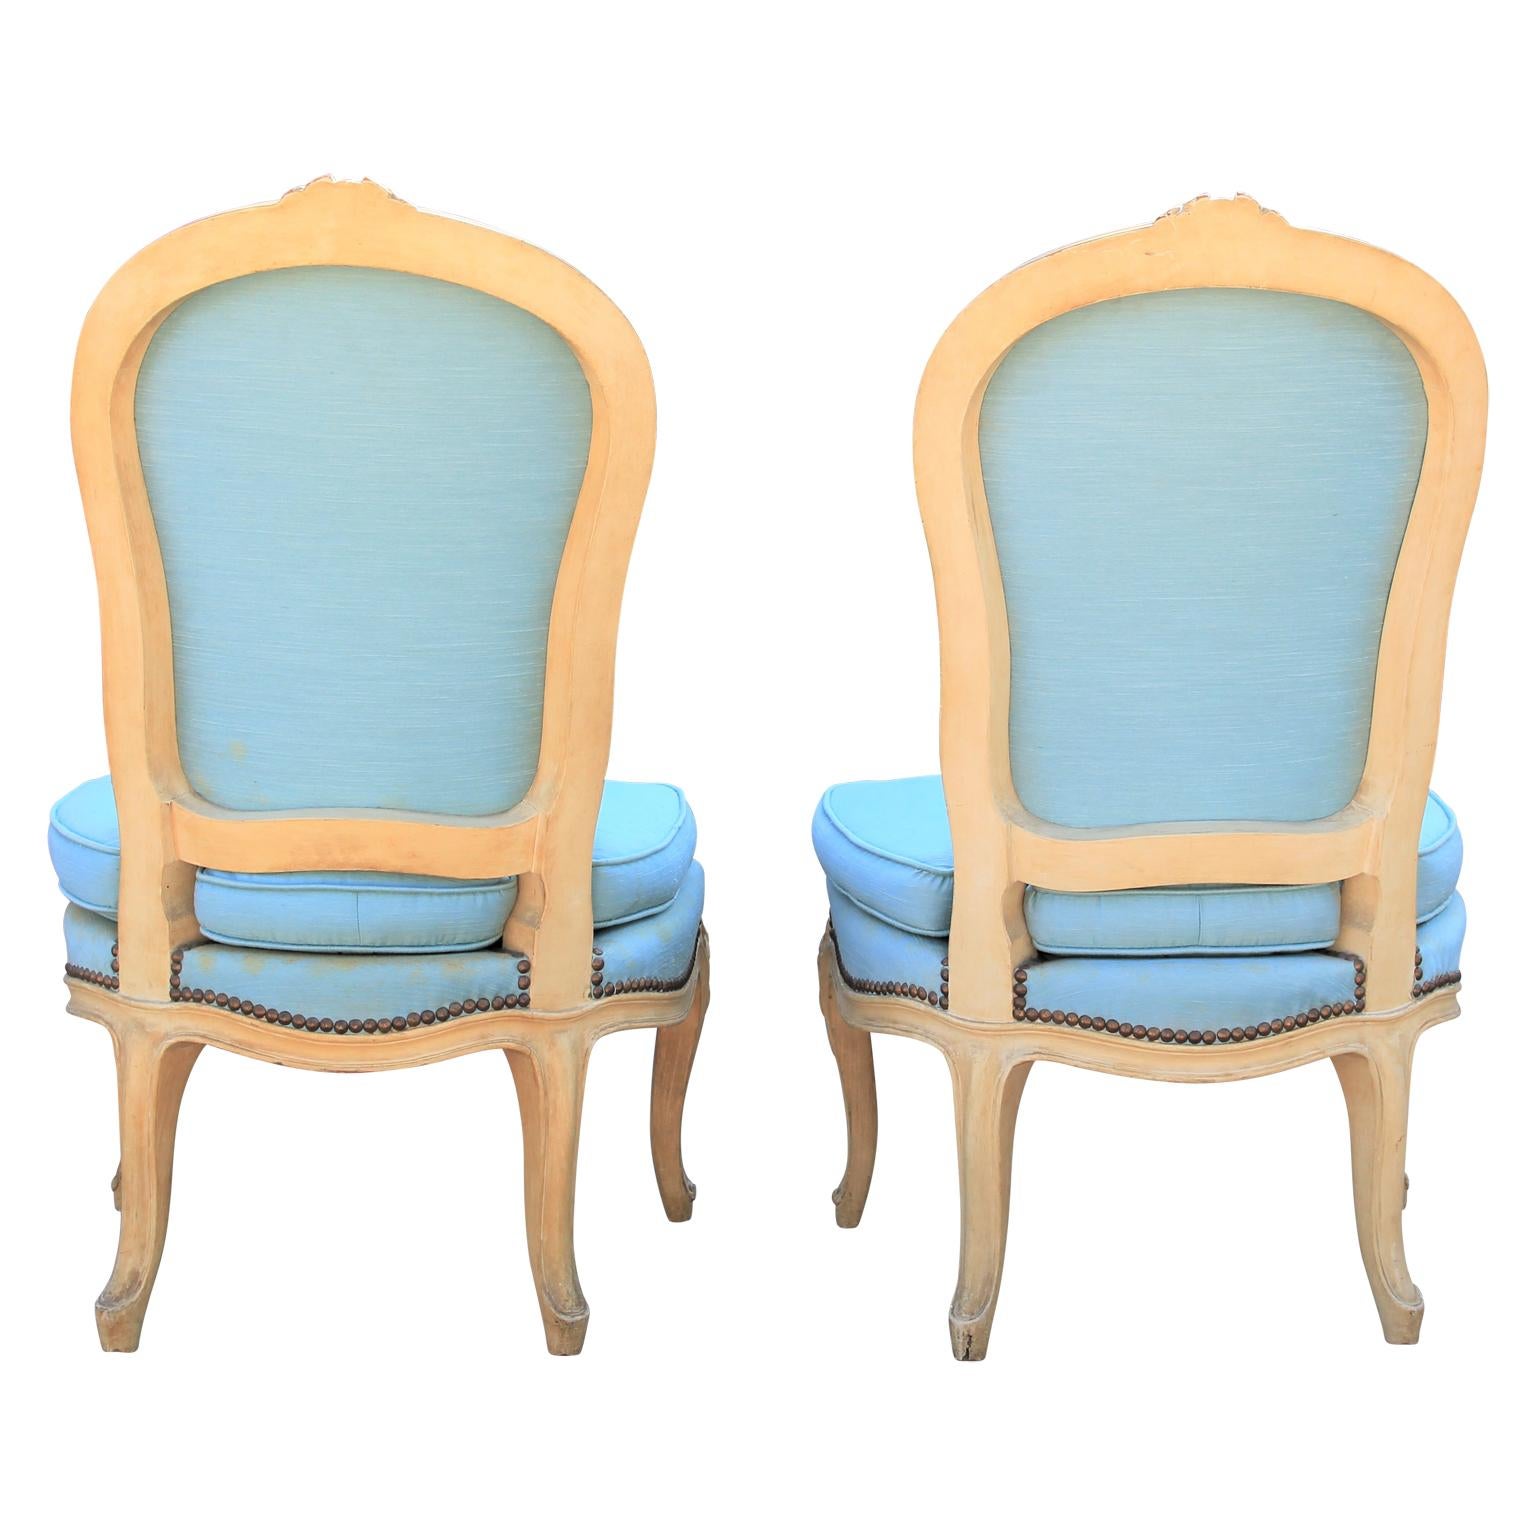 Diminutive pair of French carved painted wood slipper chairs. Perfect scale for a small space or occasional chairs. Currently in original usable fabric, however for perfection COM suggested. Custom finishing available.